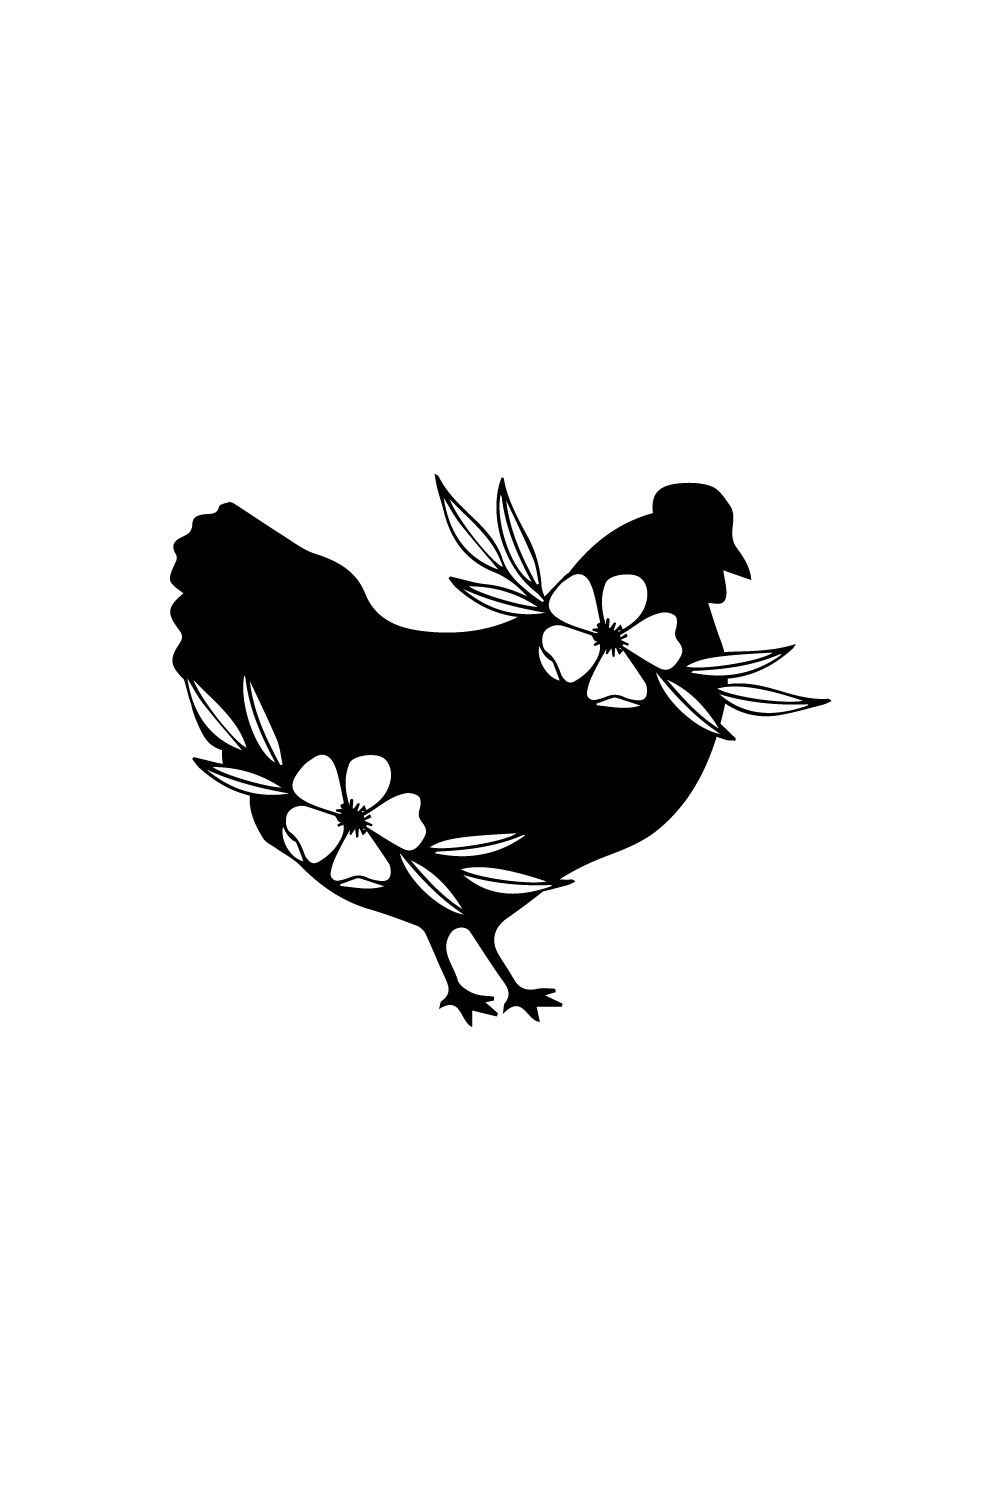 Free chicken logo pinterest preview image.